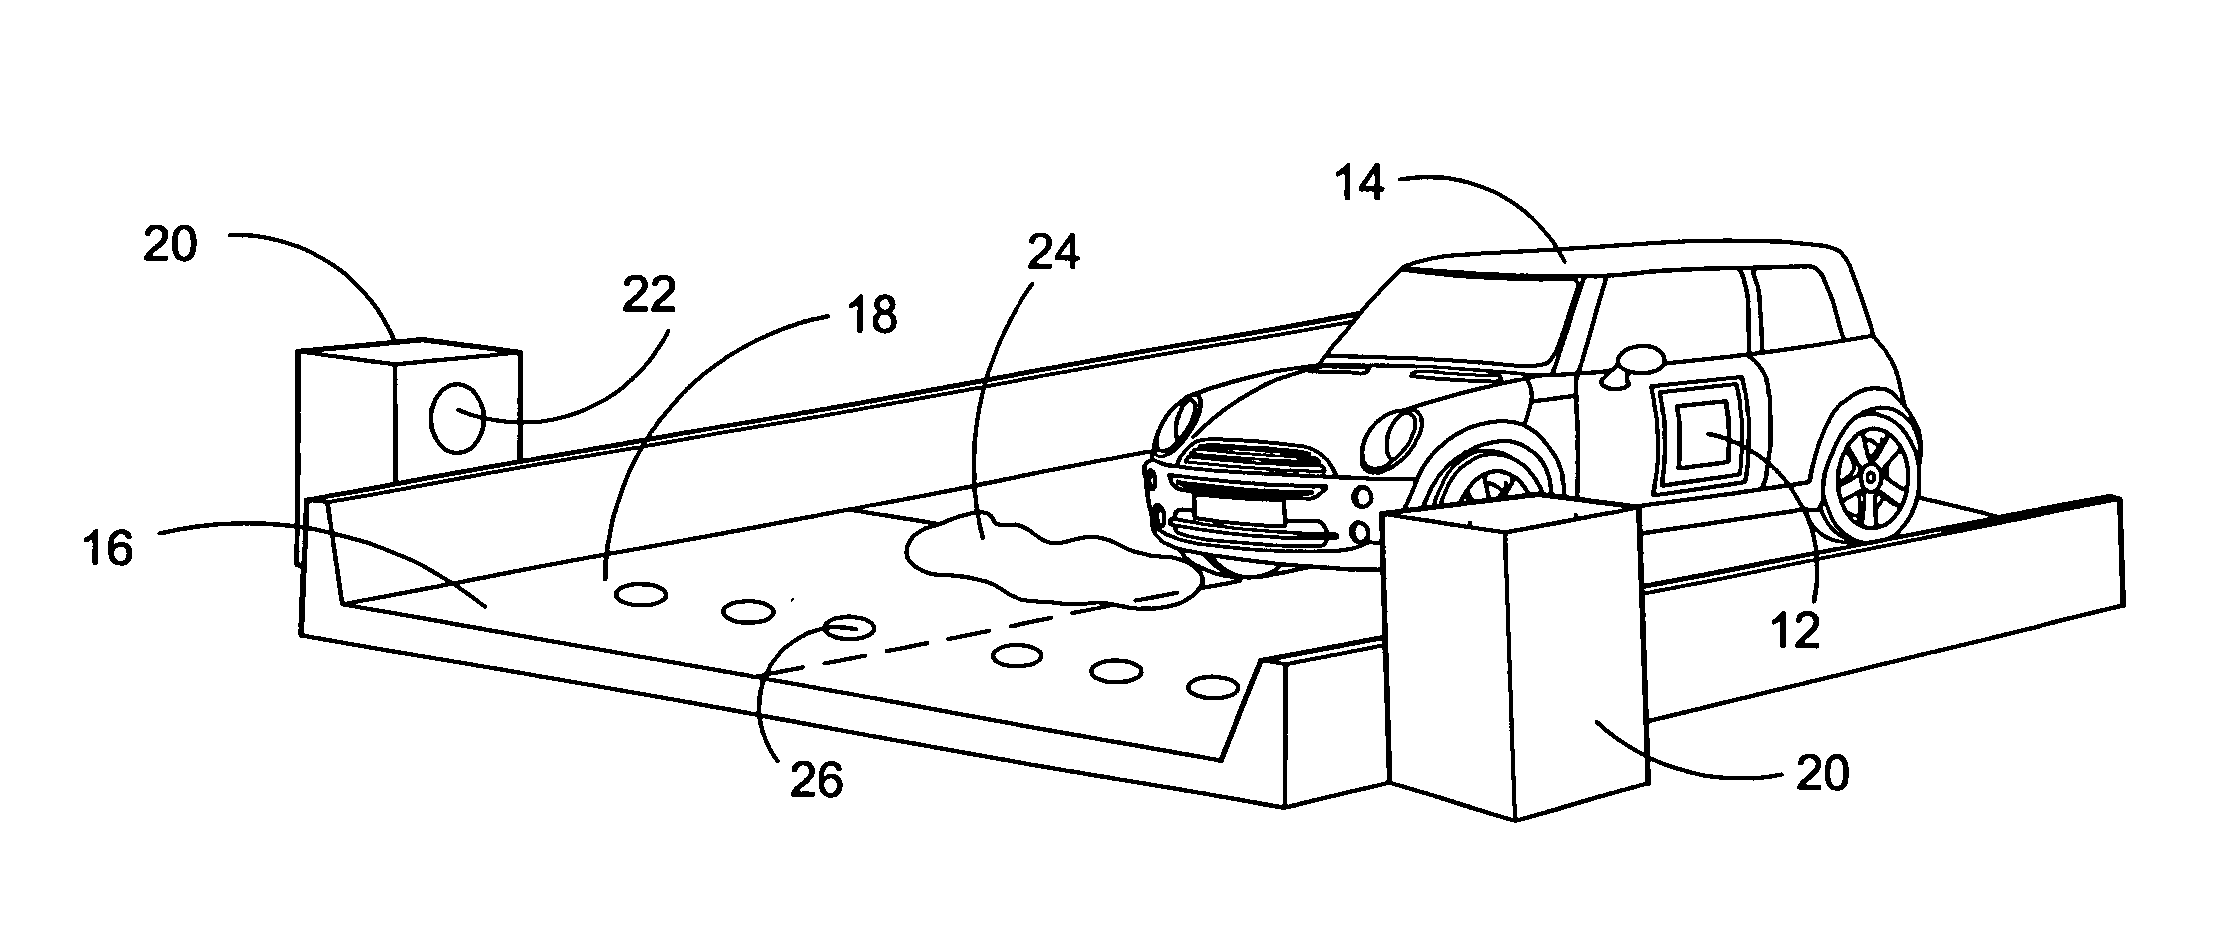 Method and apparatus for remote control vehicle identification